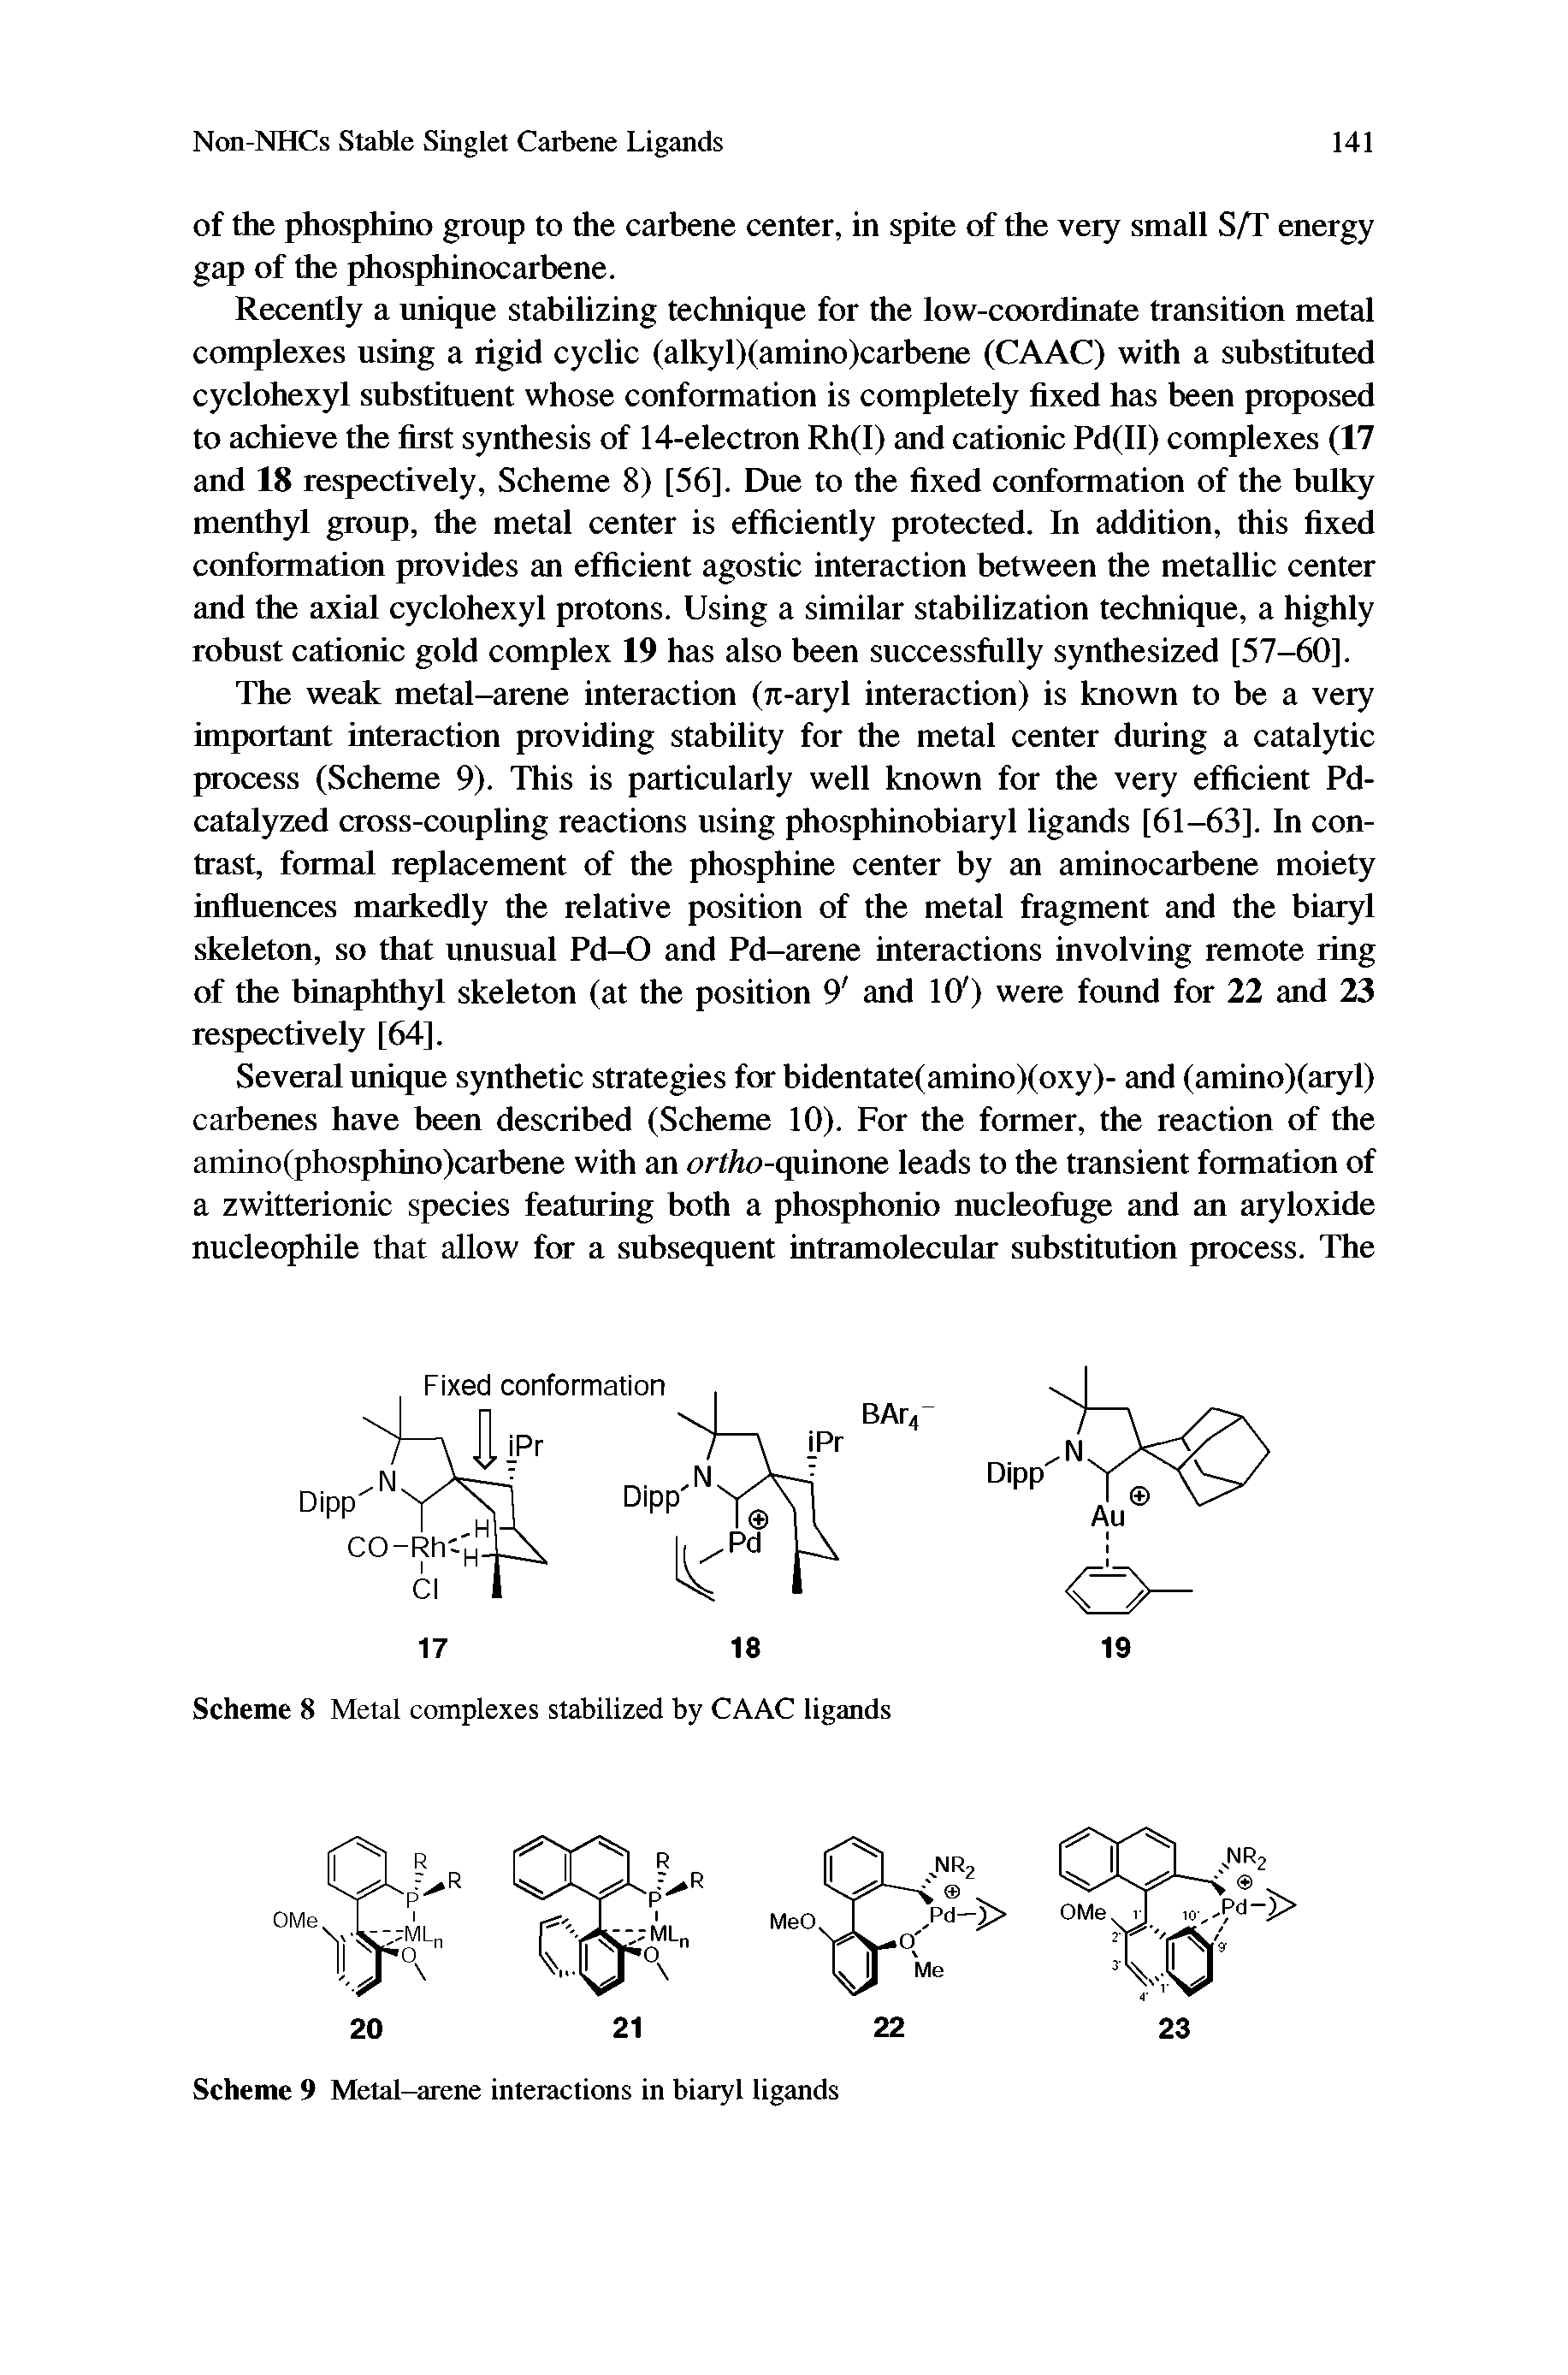 Scheme 9 Metal-arene interactions in biaryl ligands...